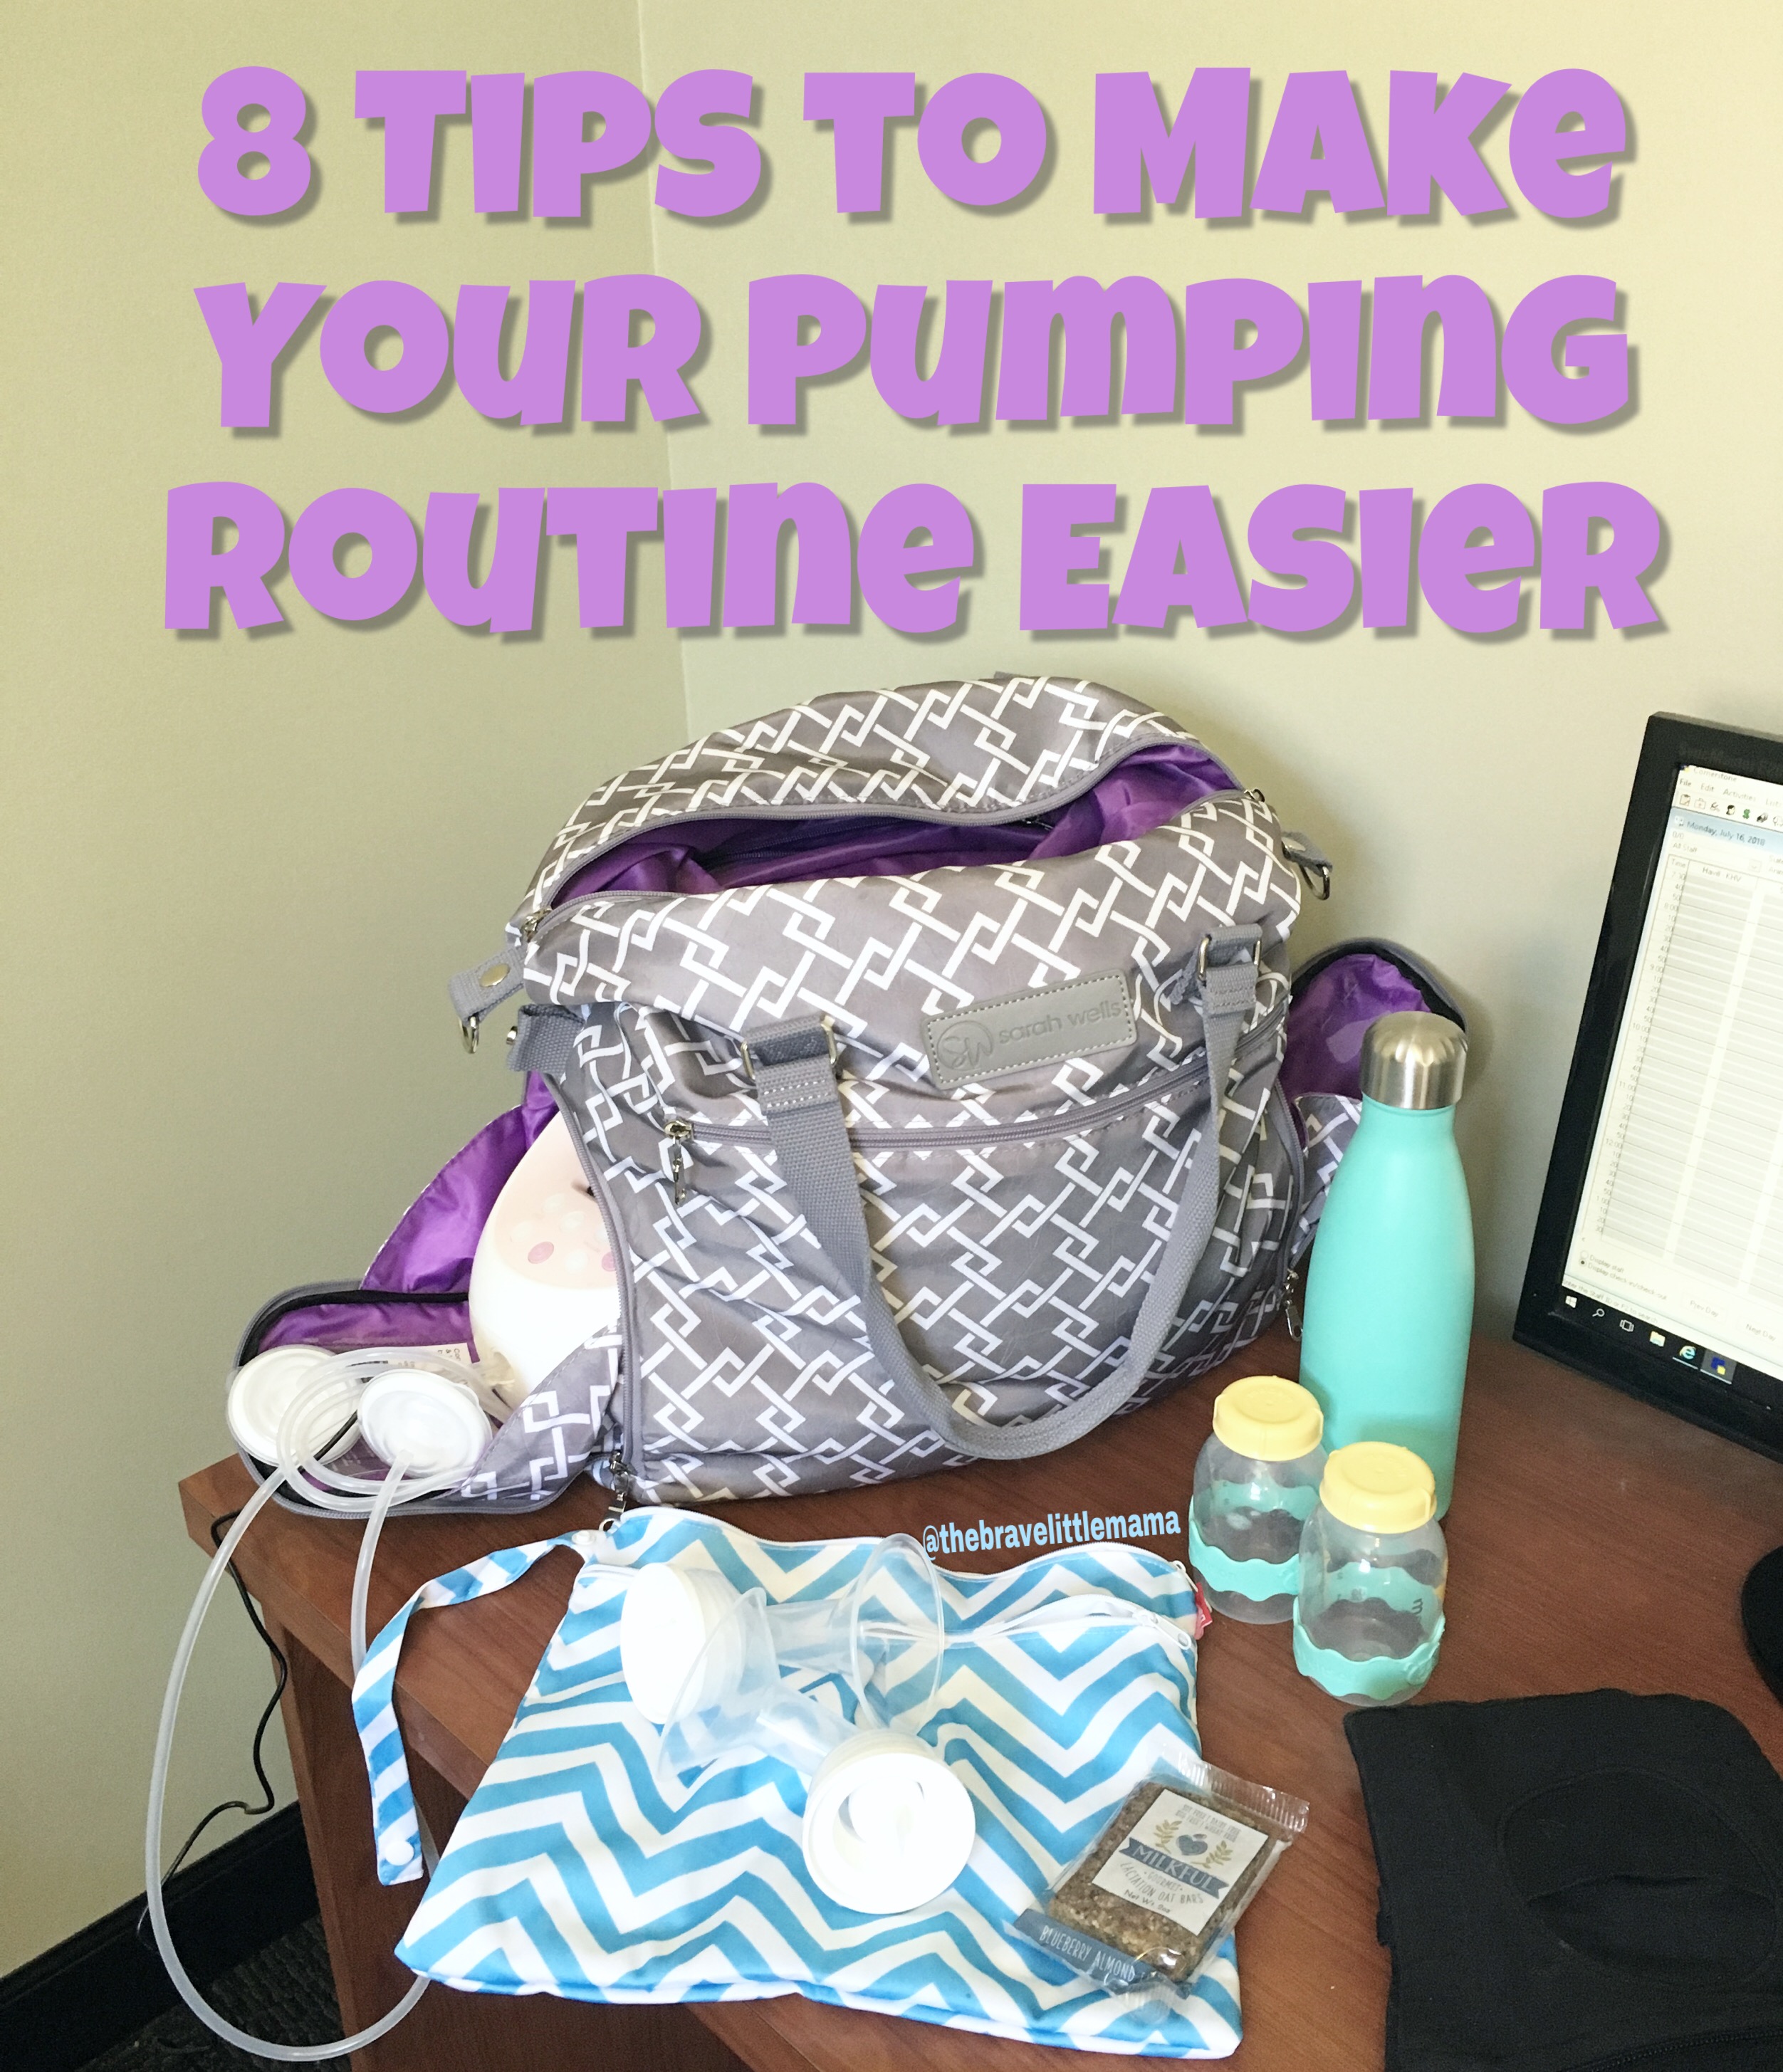 8 Tips to Make Your Pumping Routine Easier